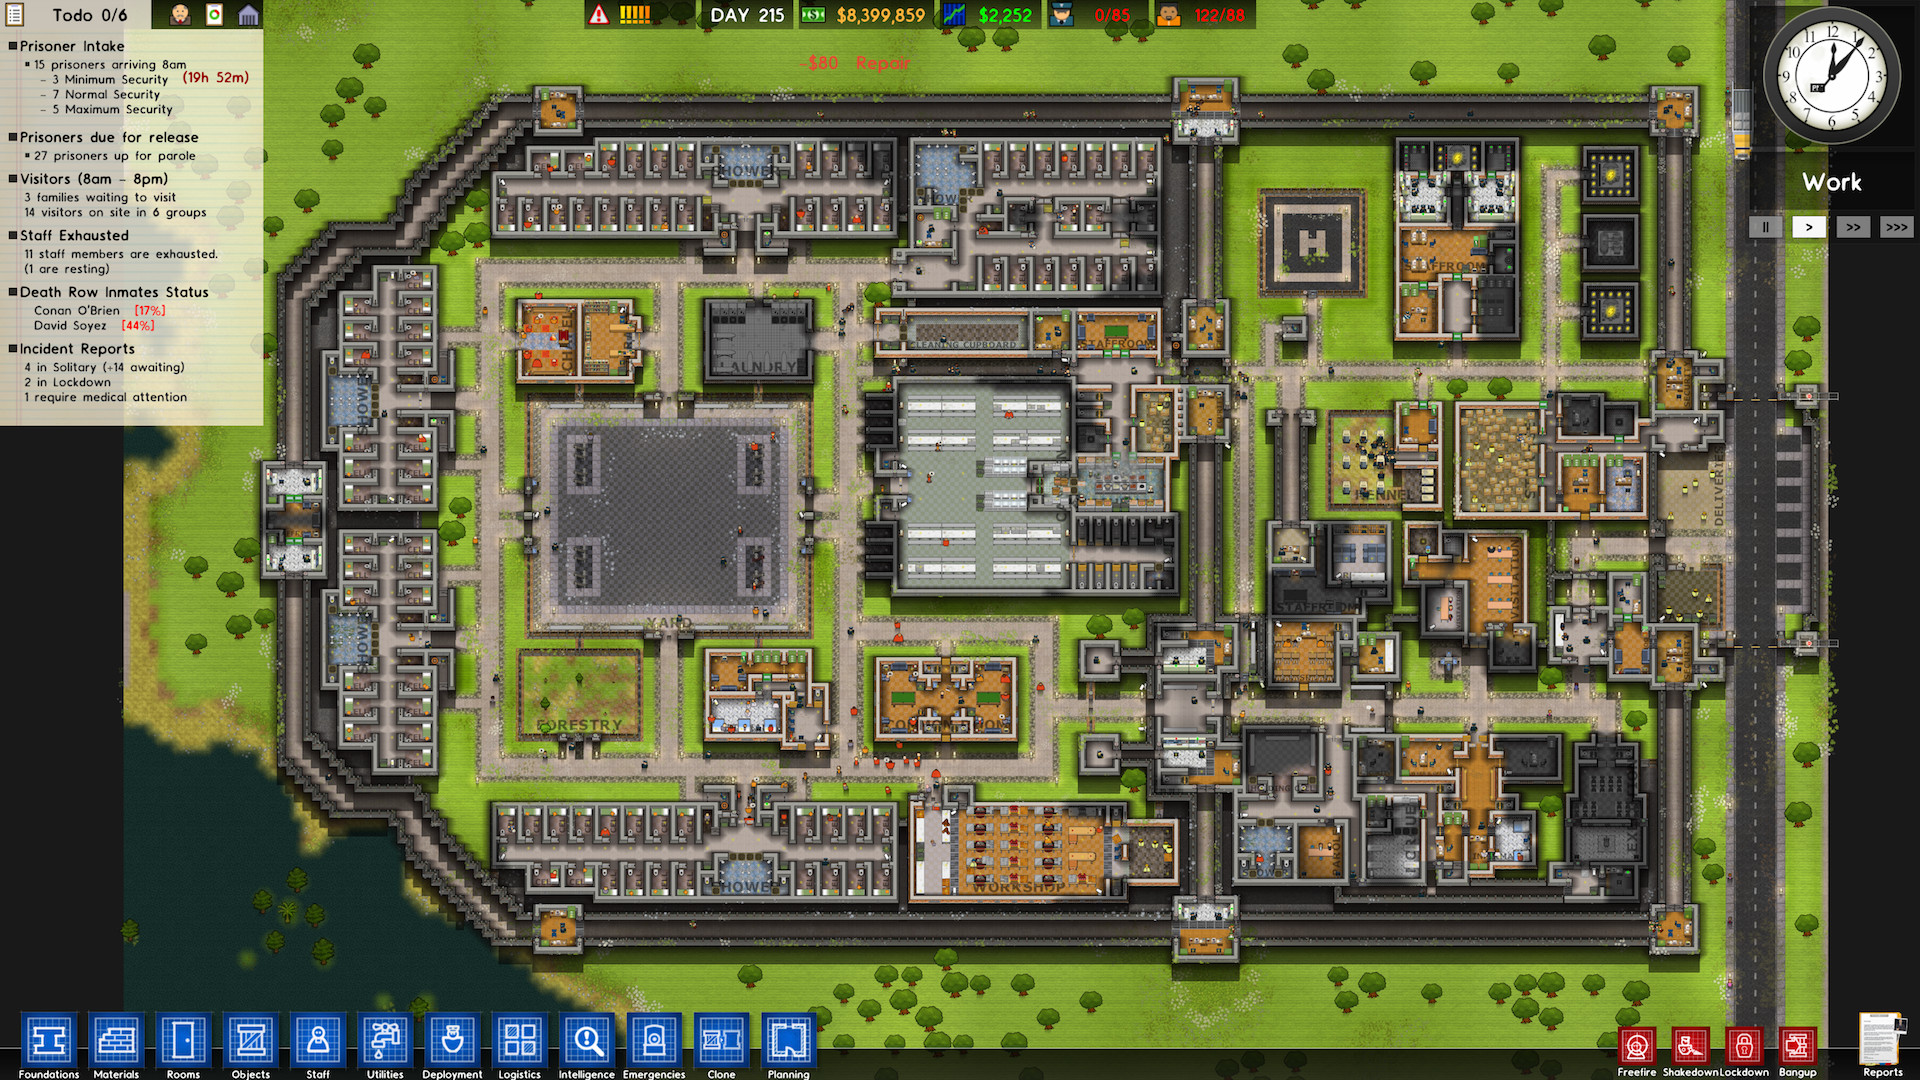 Find the best laptops for Prison Architect